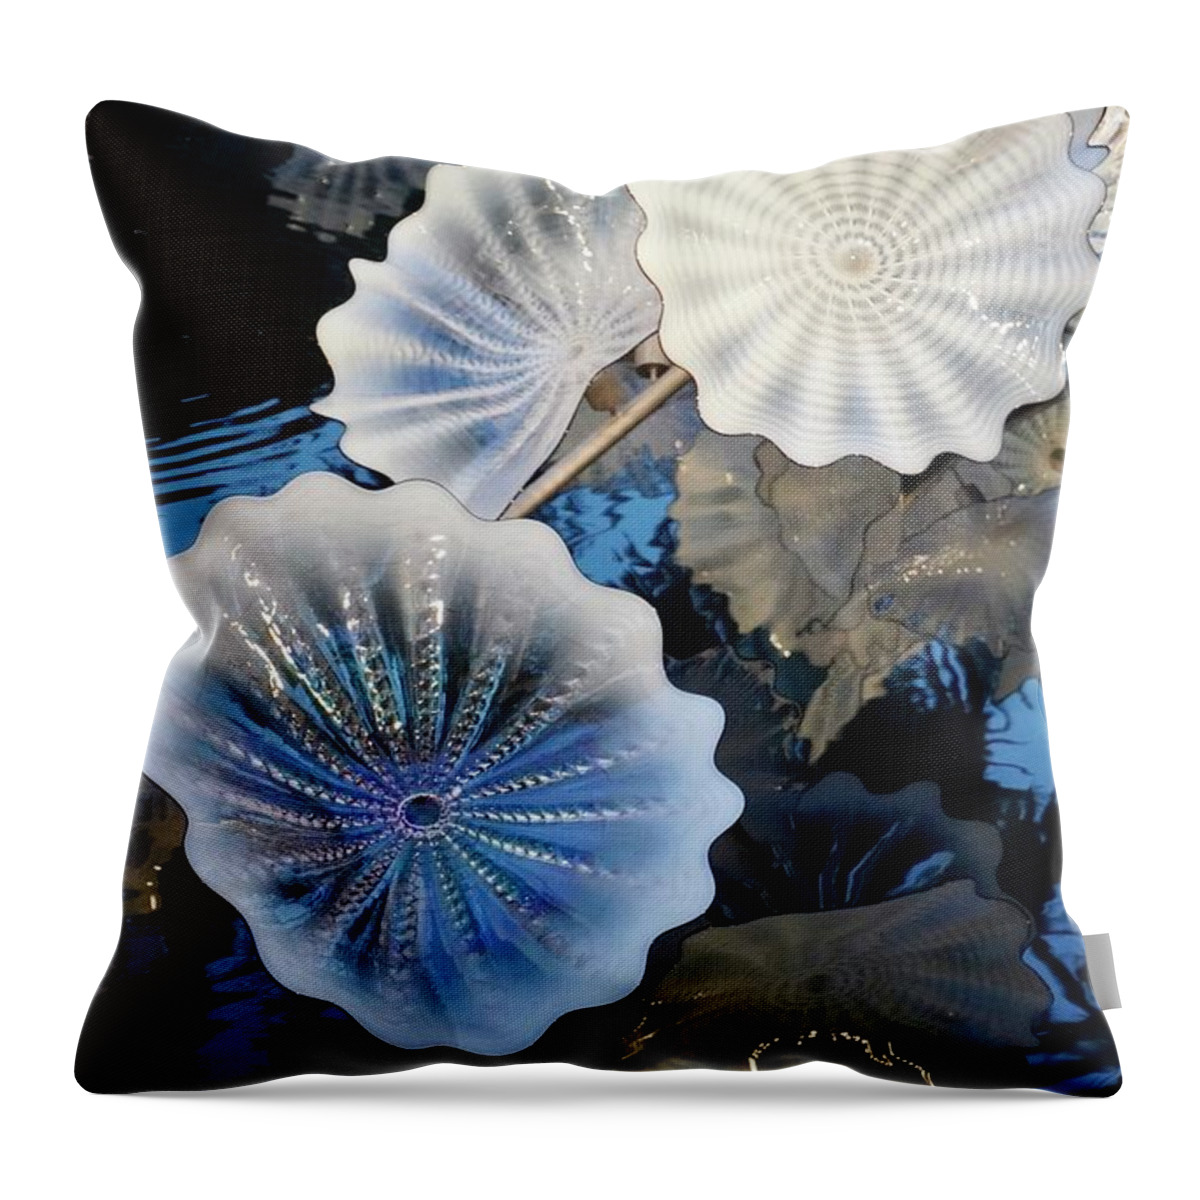  Throw Pillow featuring the digital art Etheral Dreams 5 by Alicia Kent